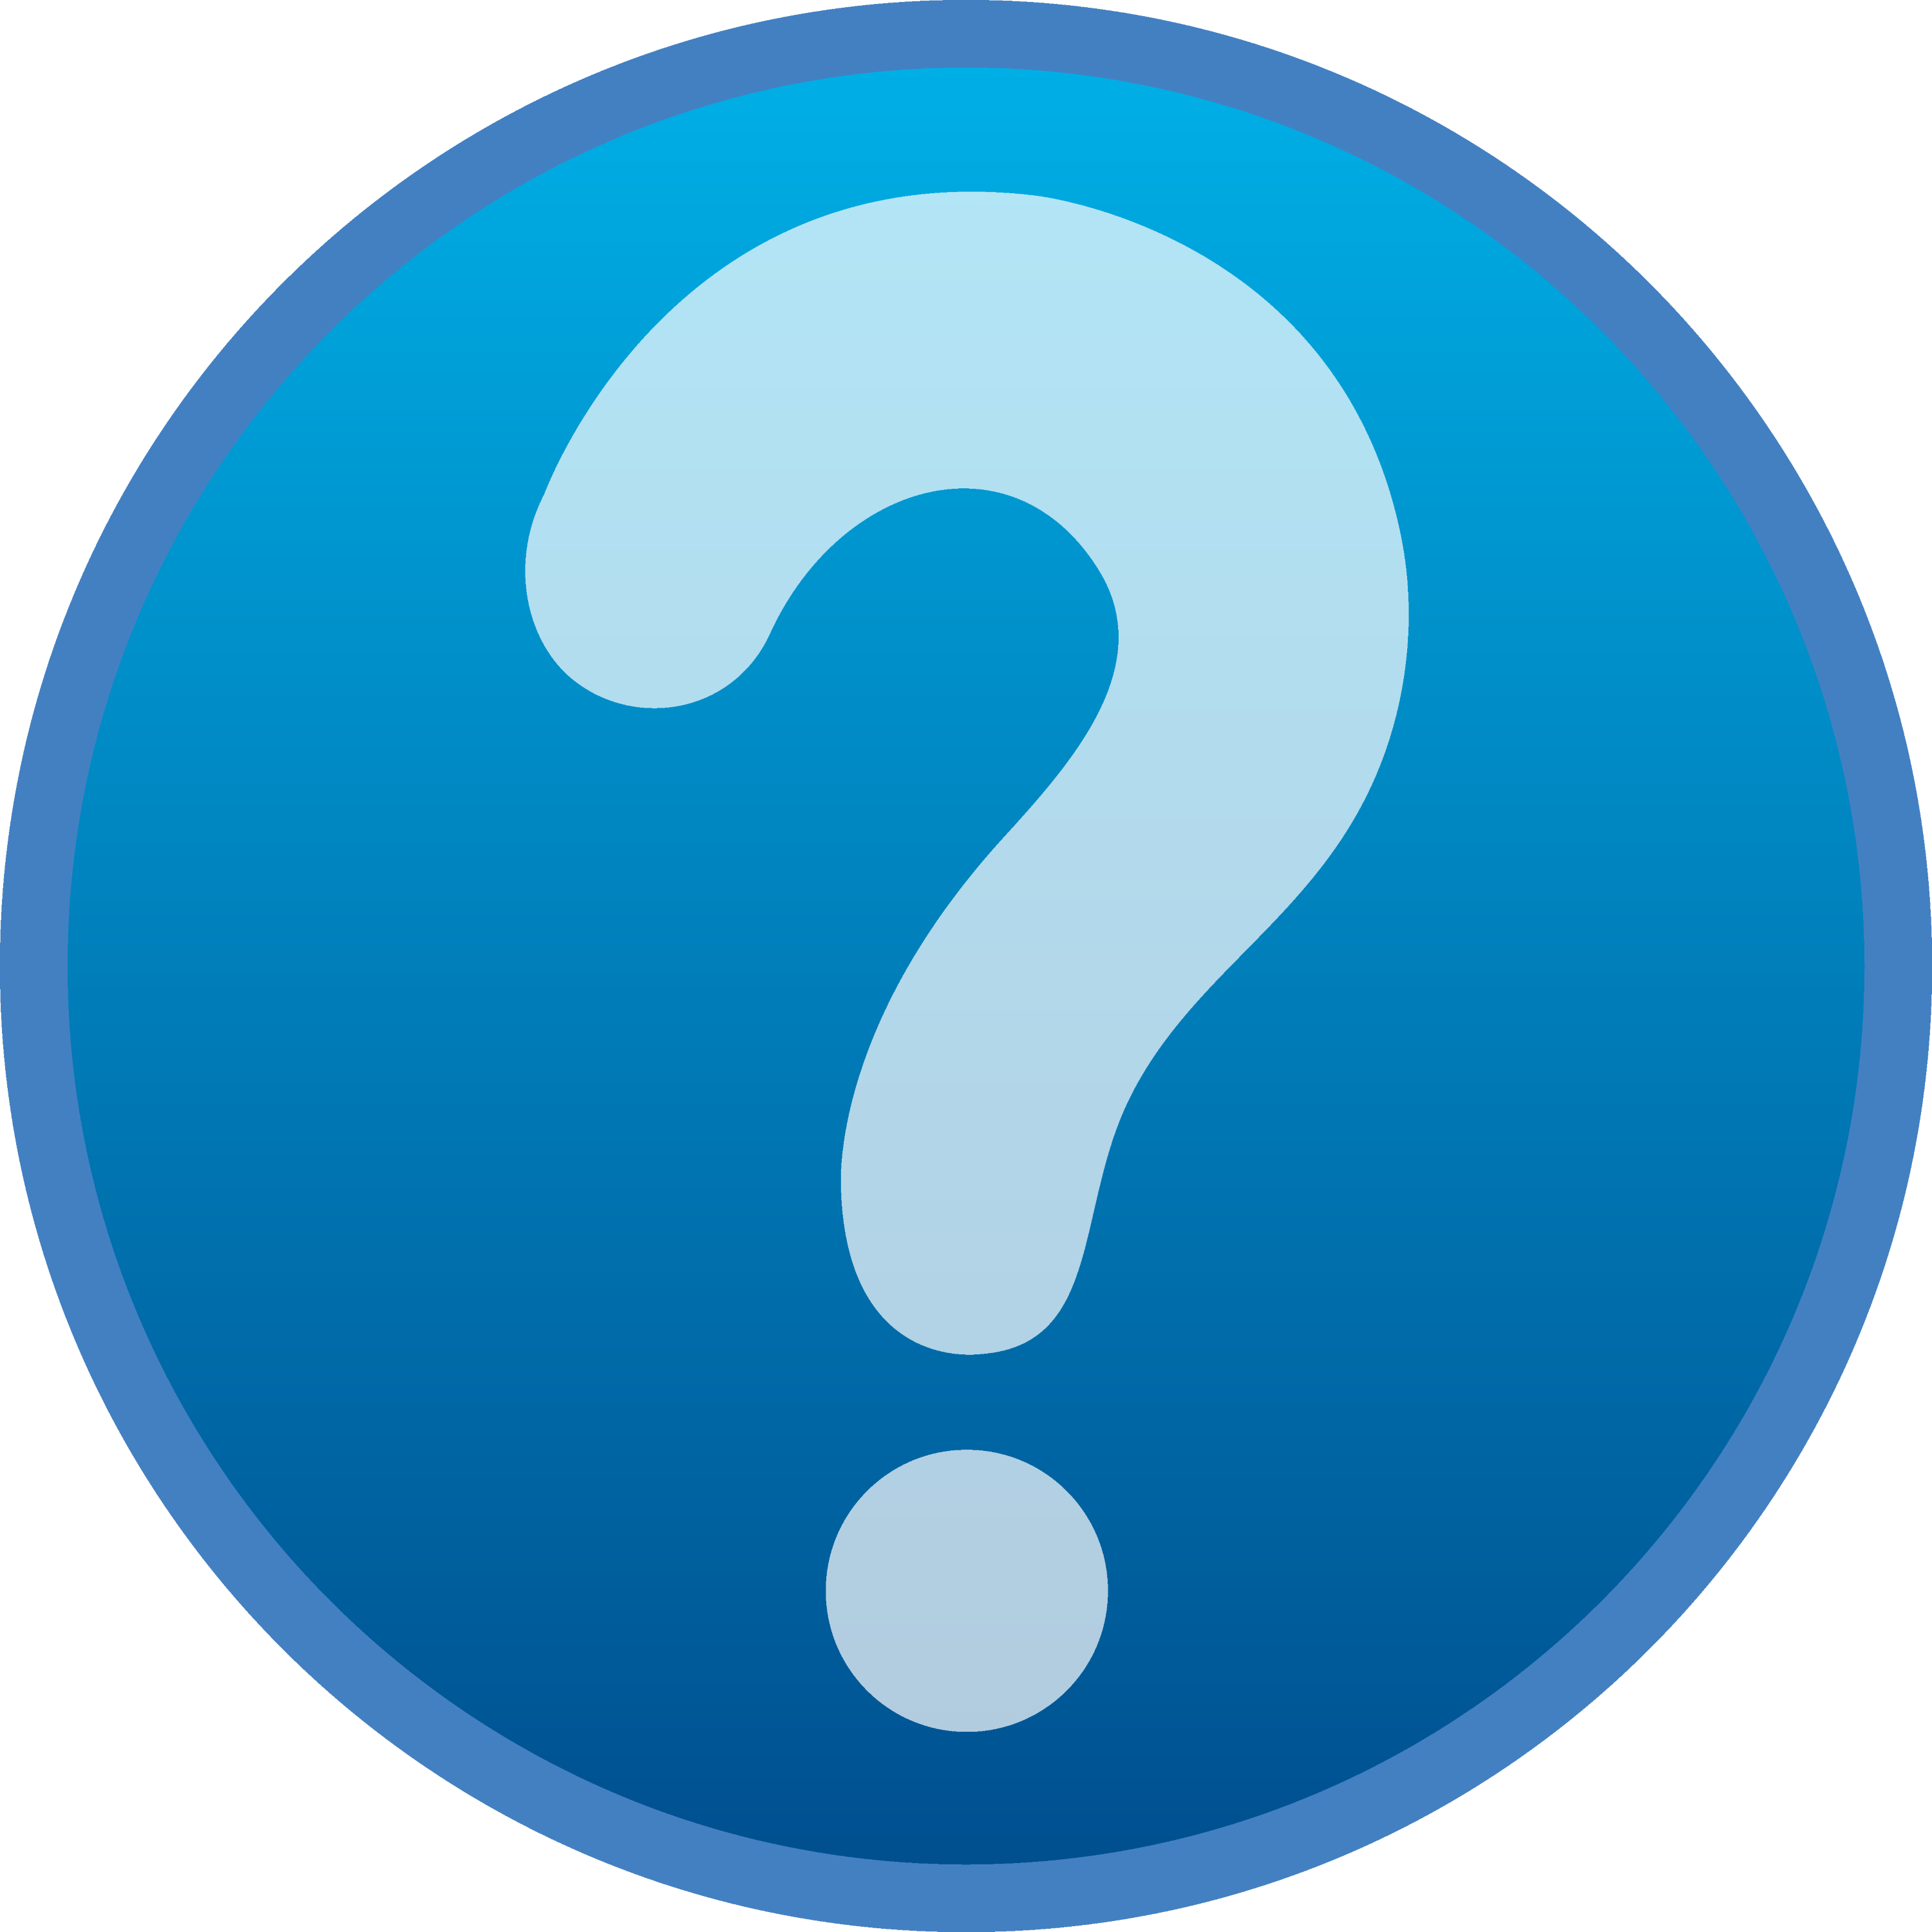 question mark images free clip art - photo #42